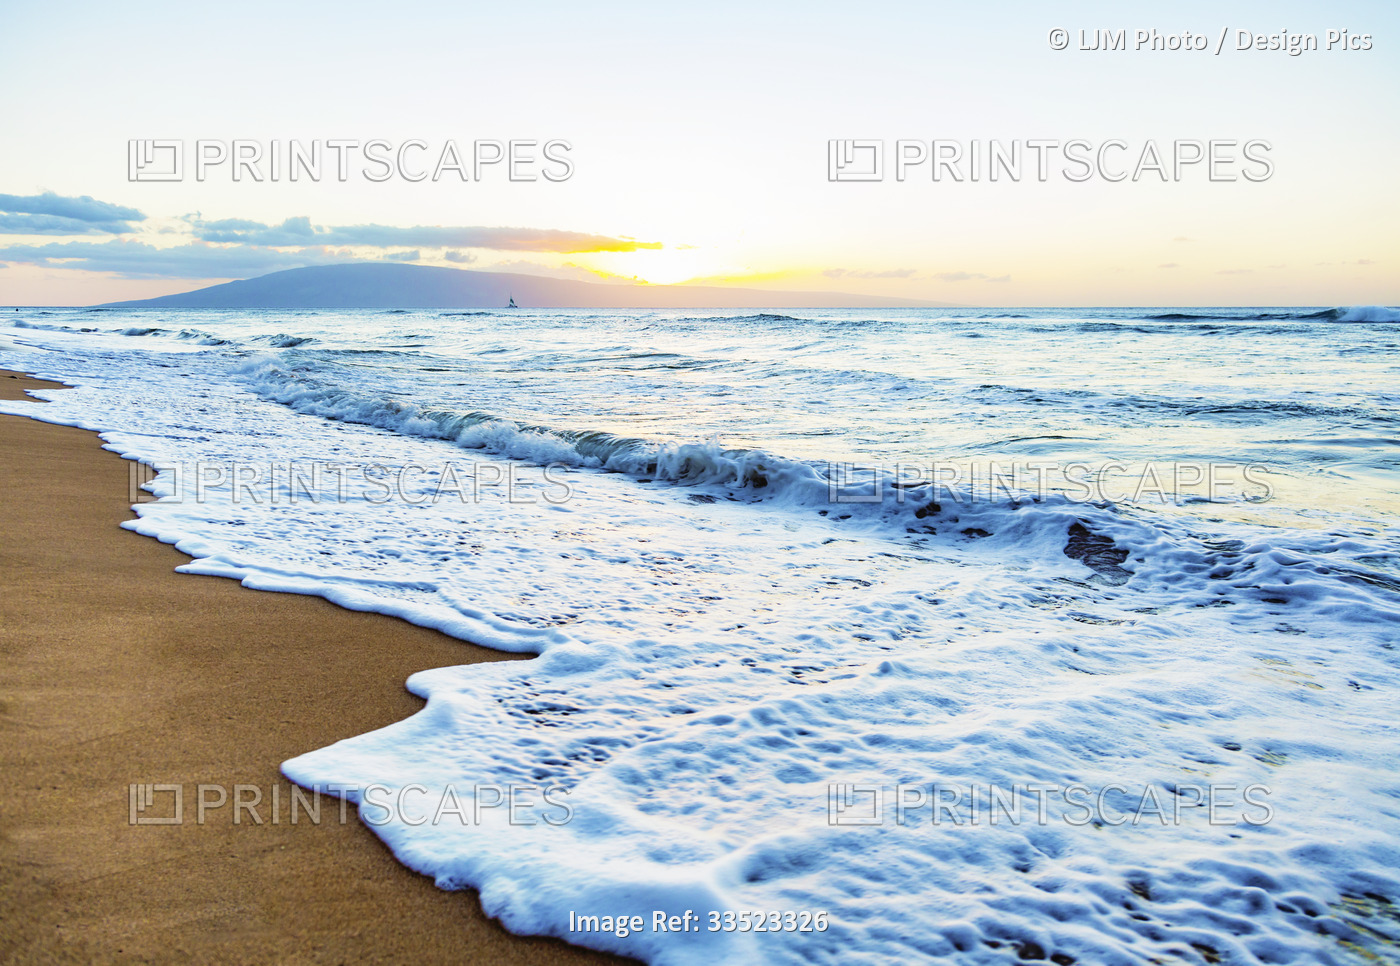 The sea surf foams as it rolls onto a beach with a view of the Island of Lanai ...